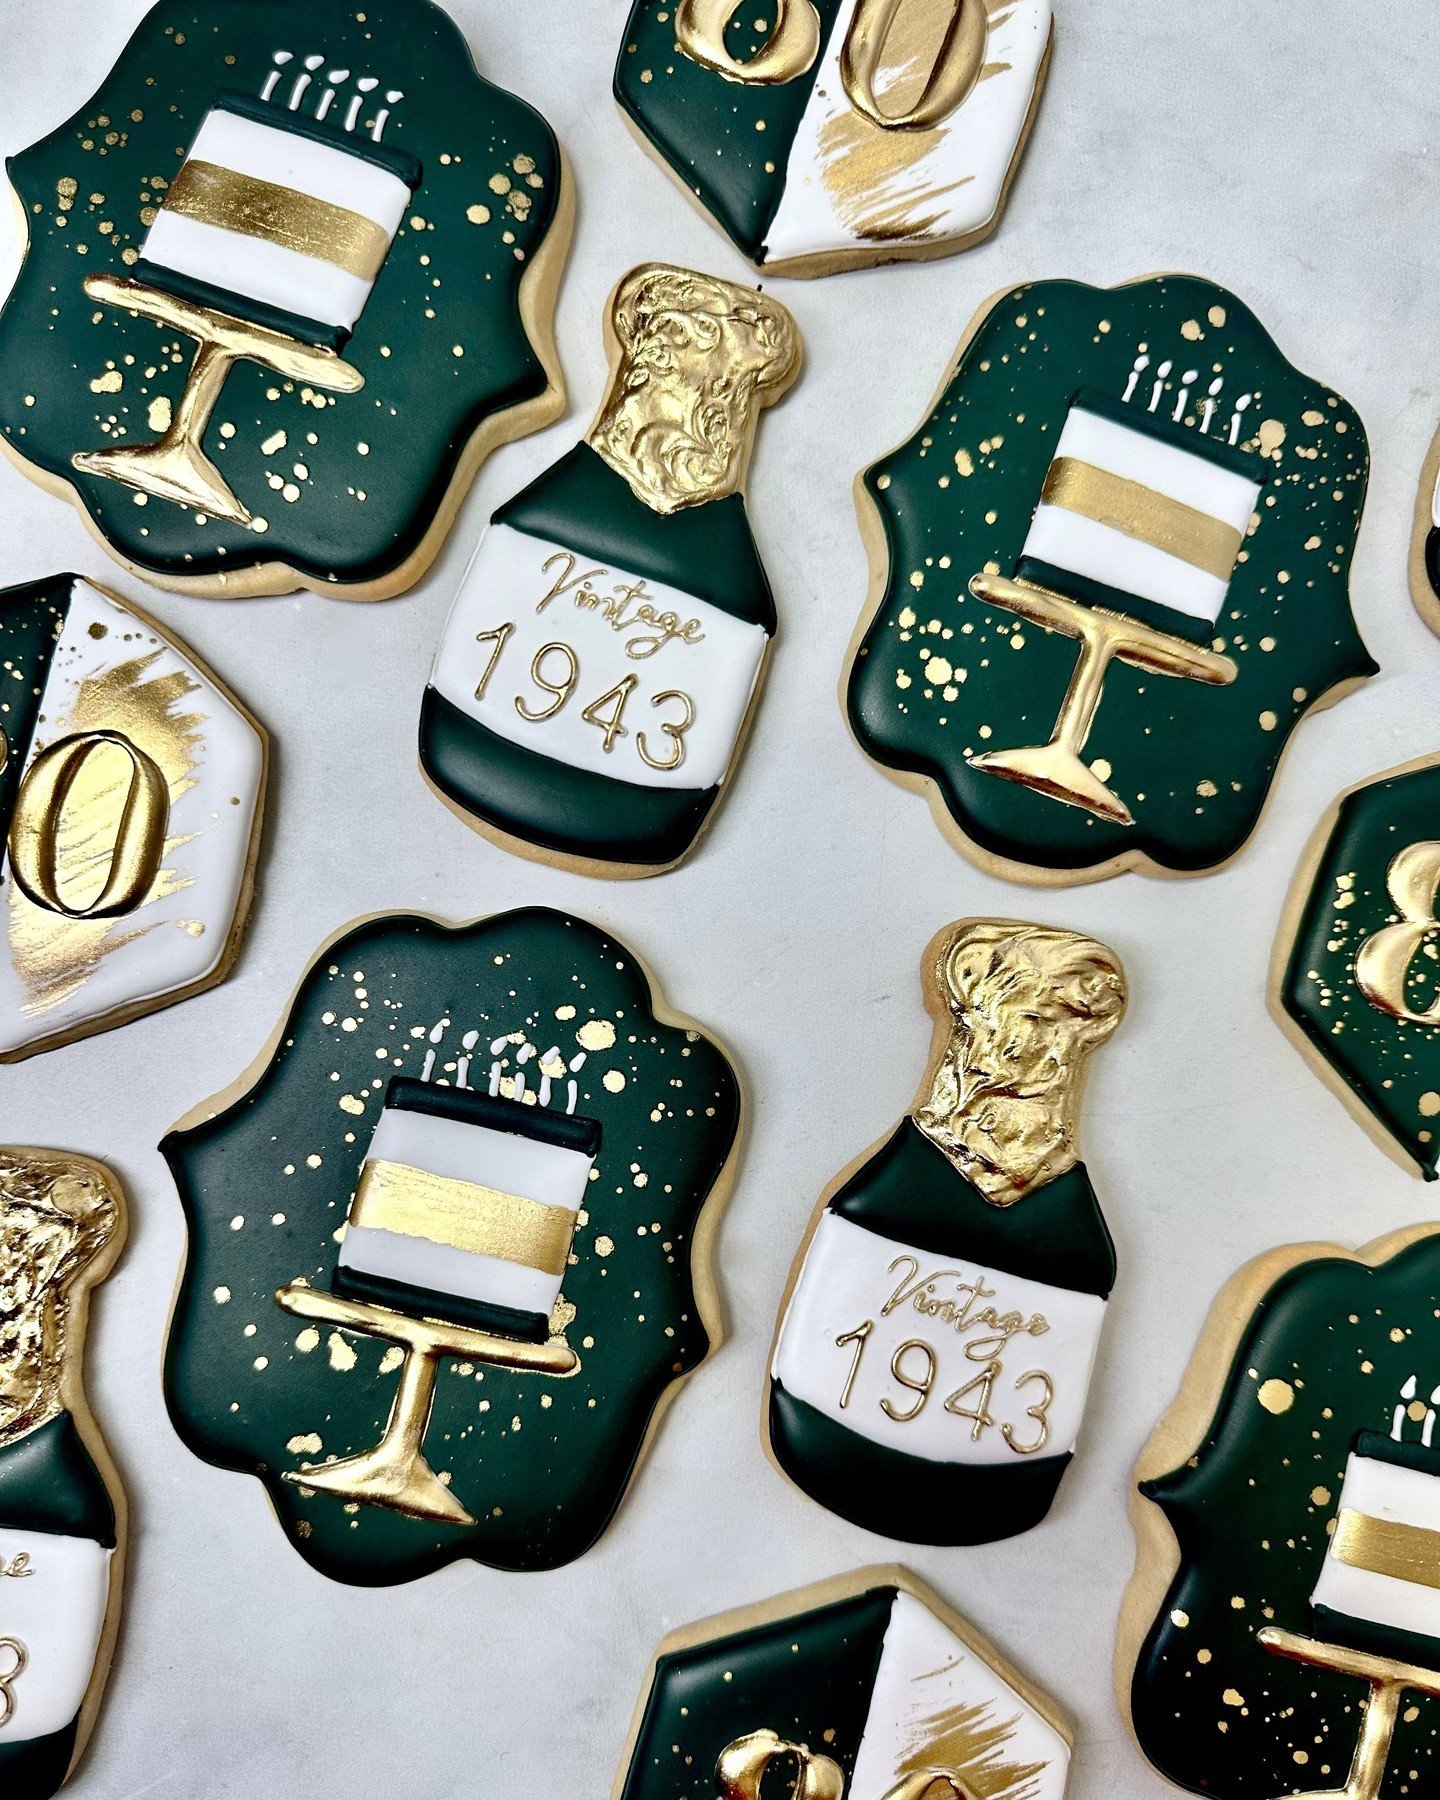 If you go to an 80th birthday party and don't bring these cookies, so help me. 🥂

#80thbirthdaycookies #kupcakekitchen #customcookies #wantcake #80thbirthday #80thbirthdayparty #80thbirthdaycake #cookiegram #birthdayideas #birthdaypartyideas #birthd